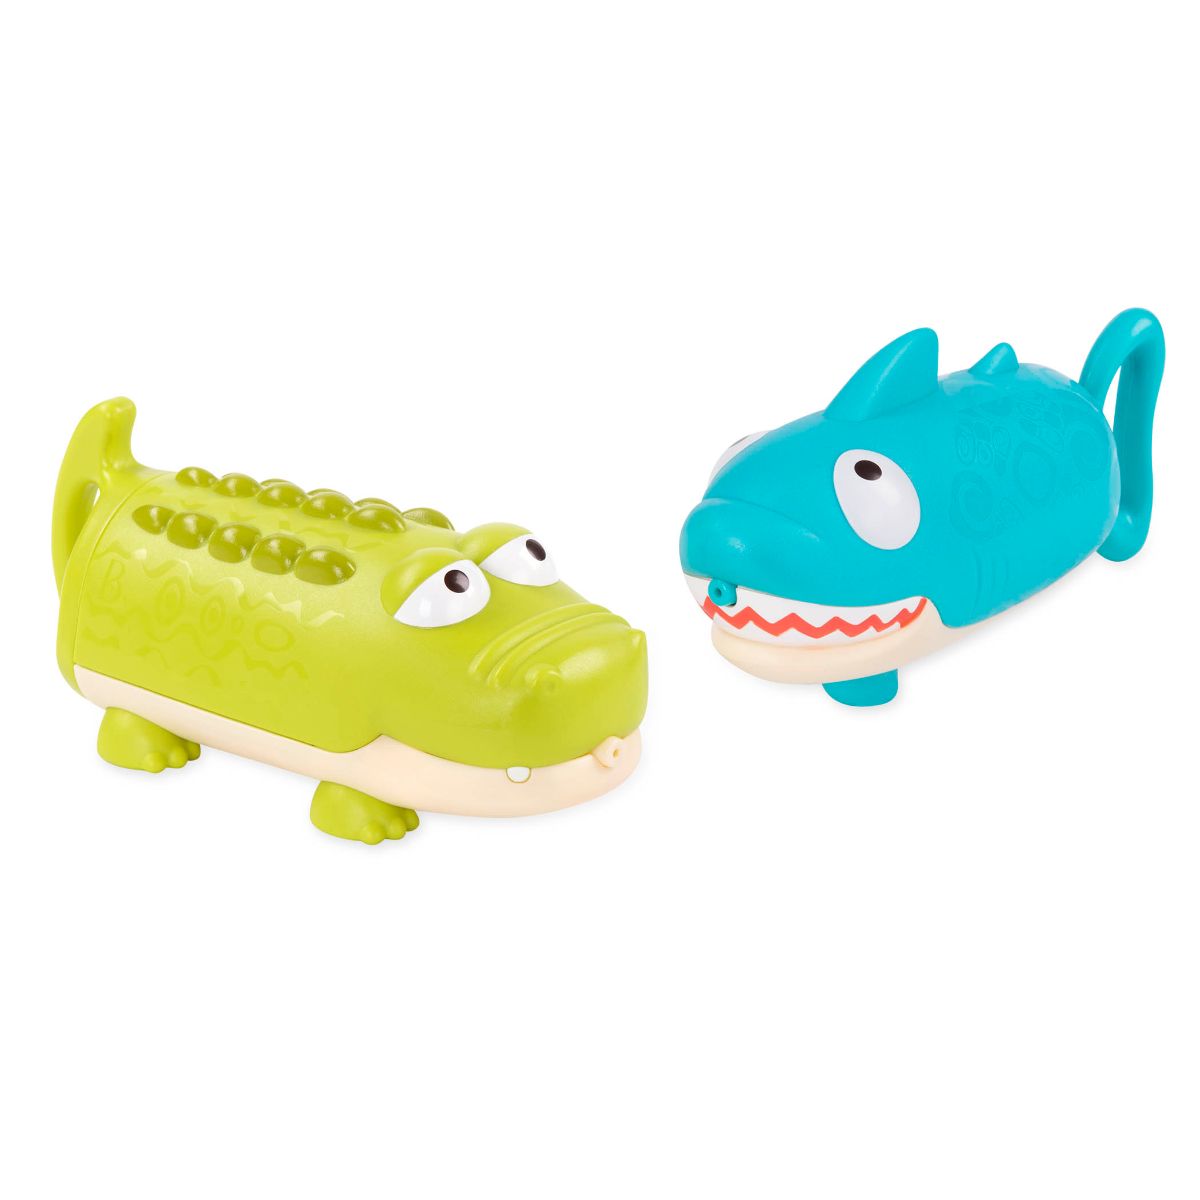 Crocodile and shark water squirt toys